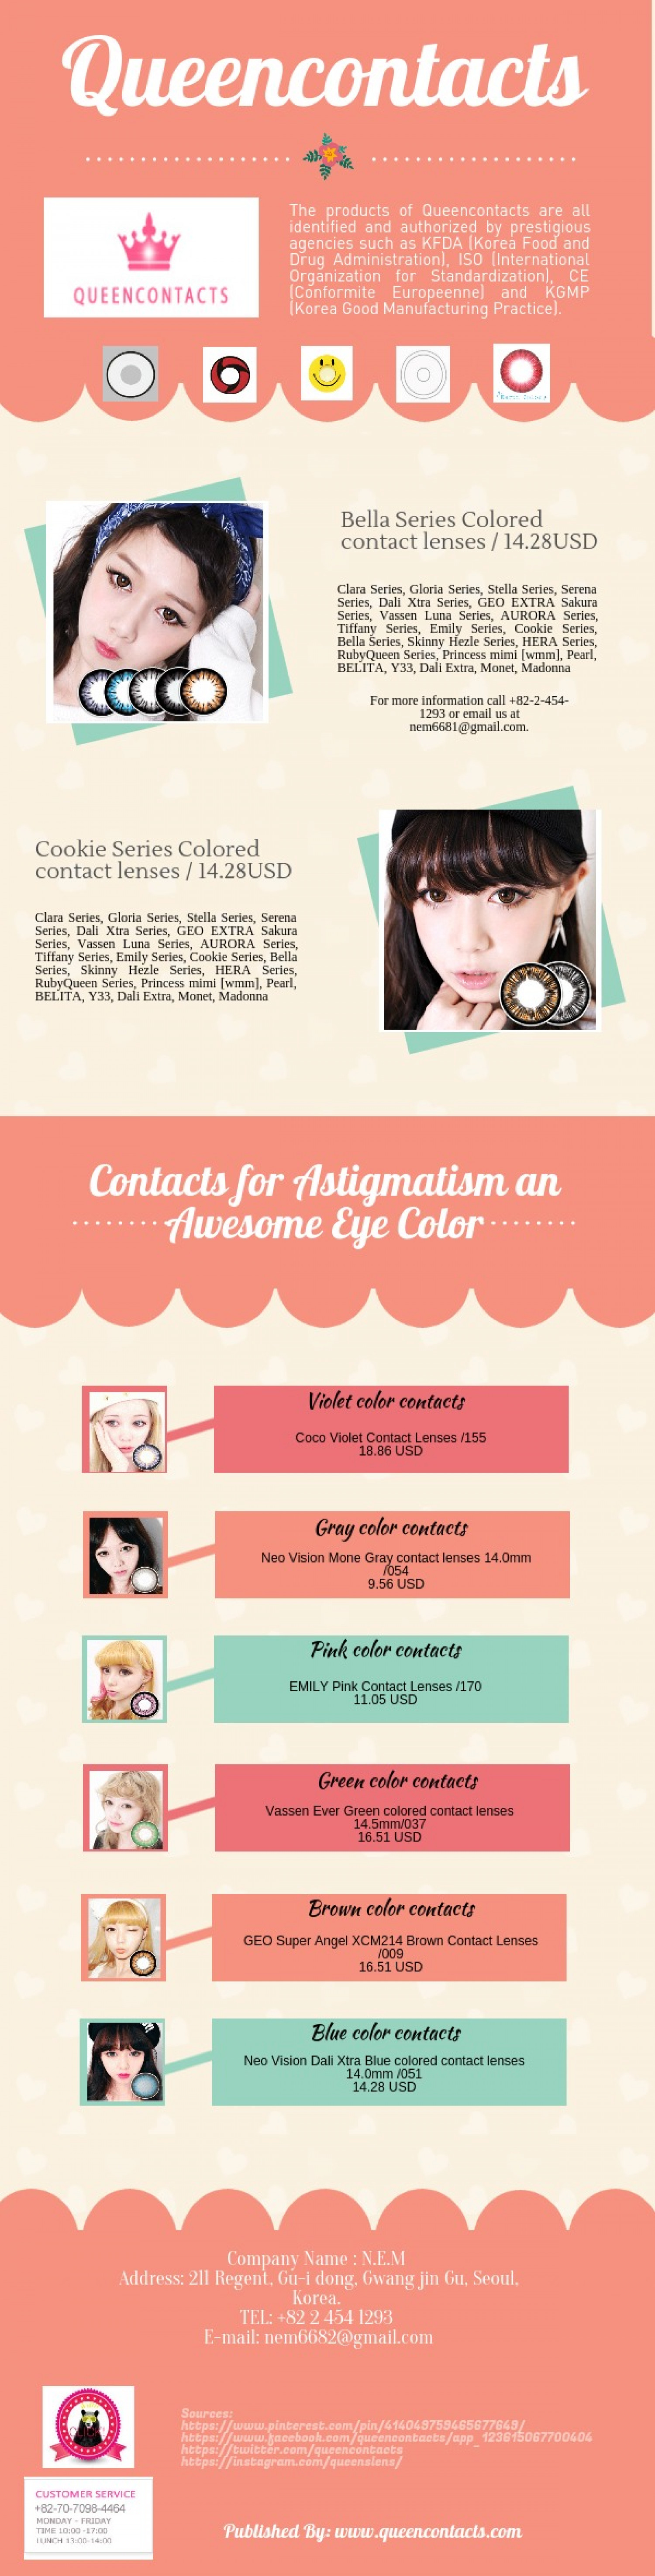 Queencontacts Infographic